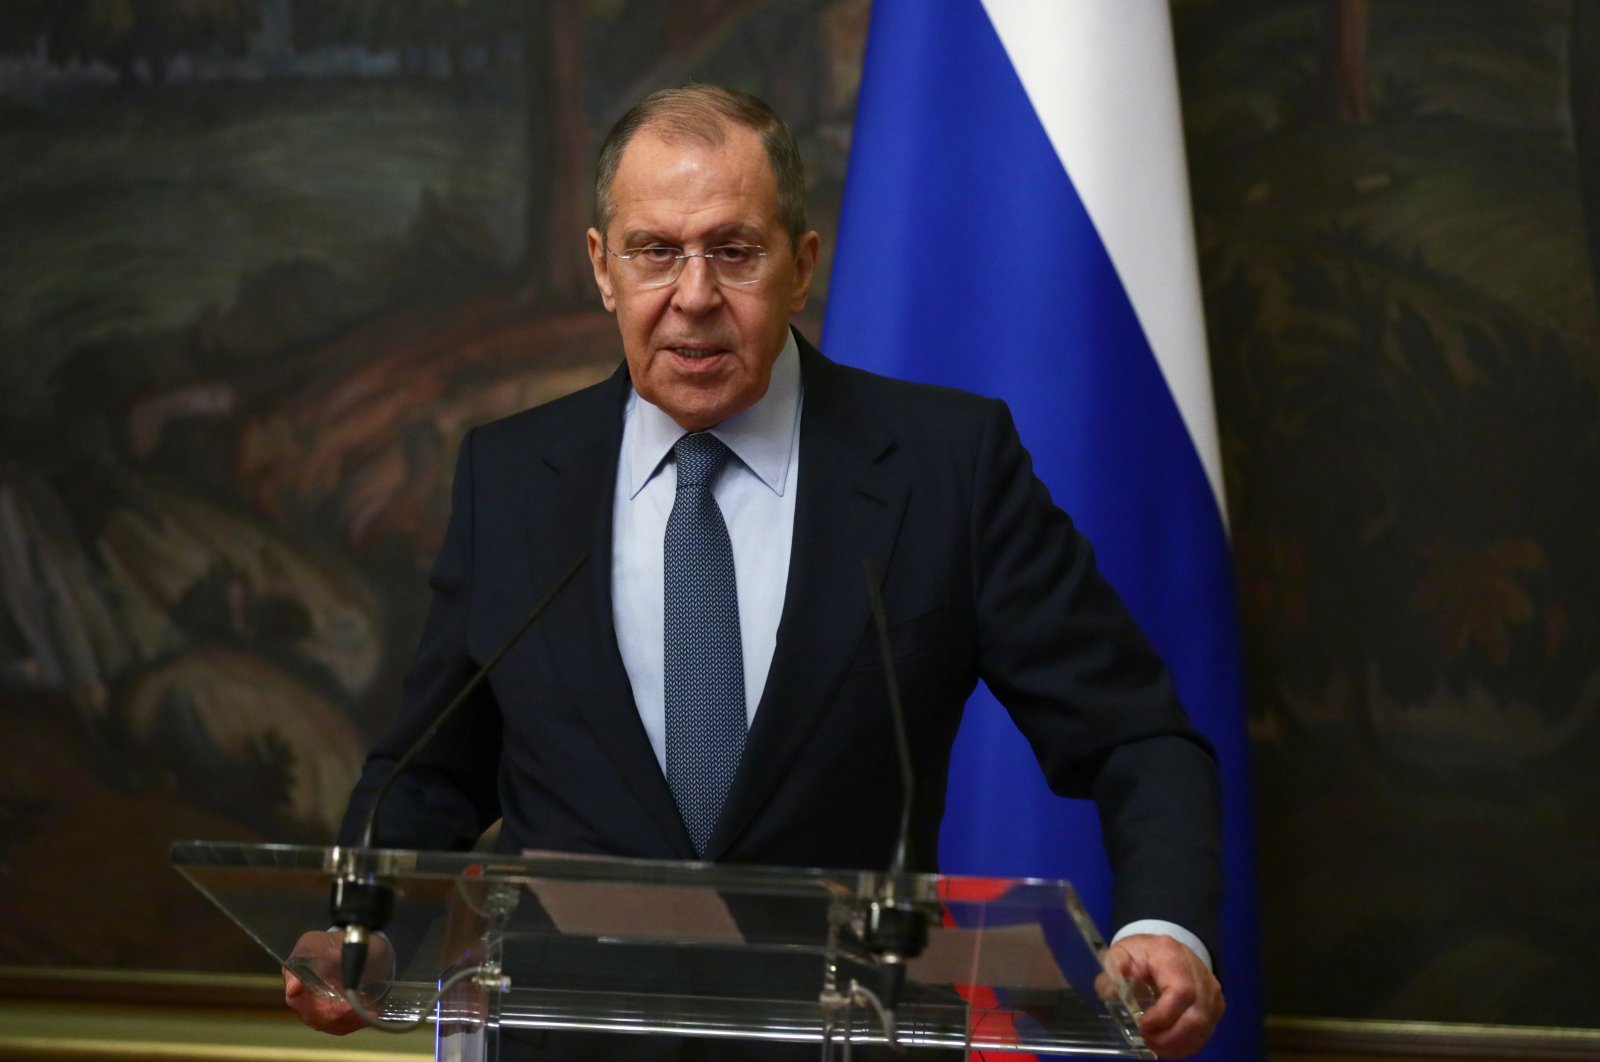 Russian Foreign Minister Sergey Lavrov speaks during a news conference in Moscow, Russia, April 26, 2021. (EPA Photo)